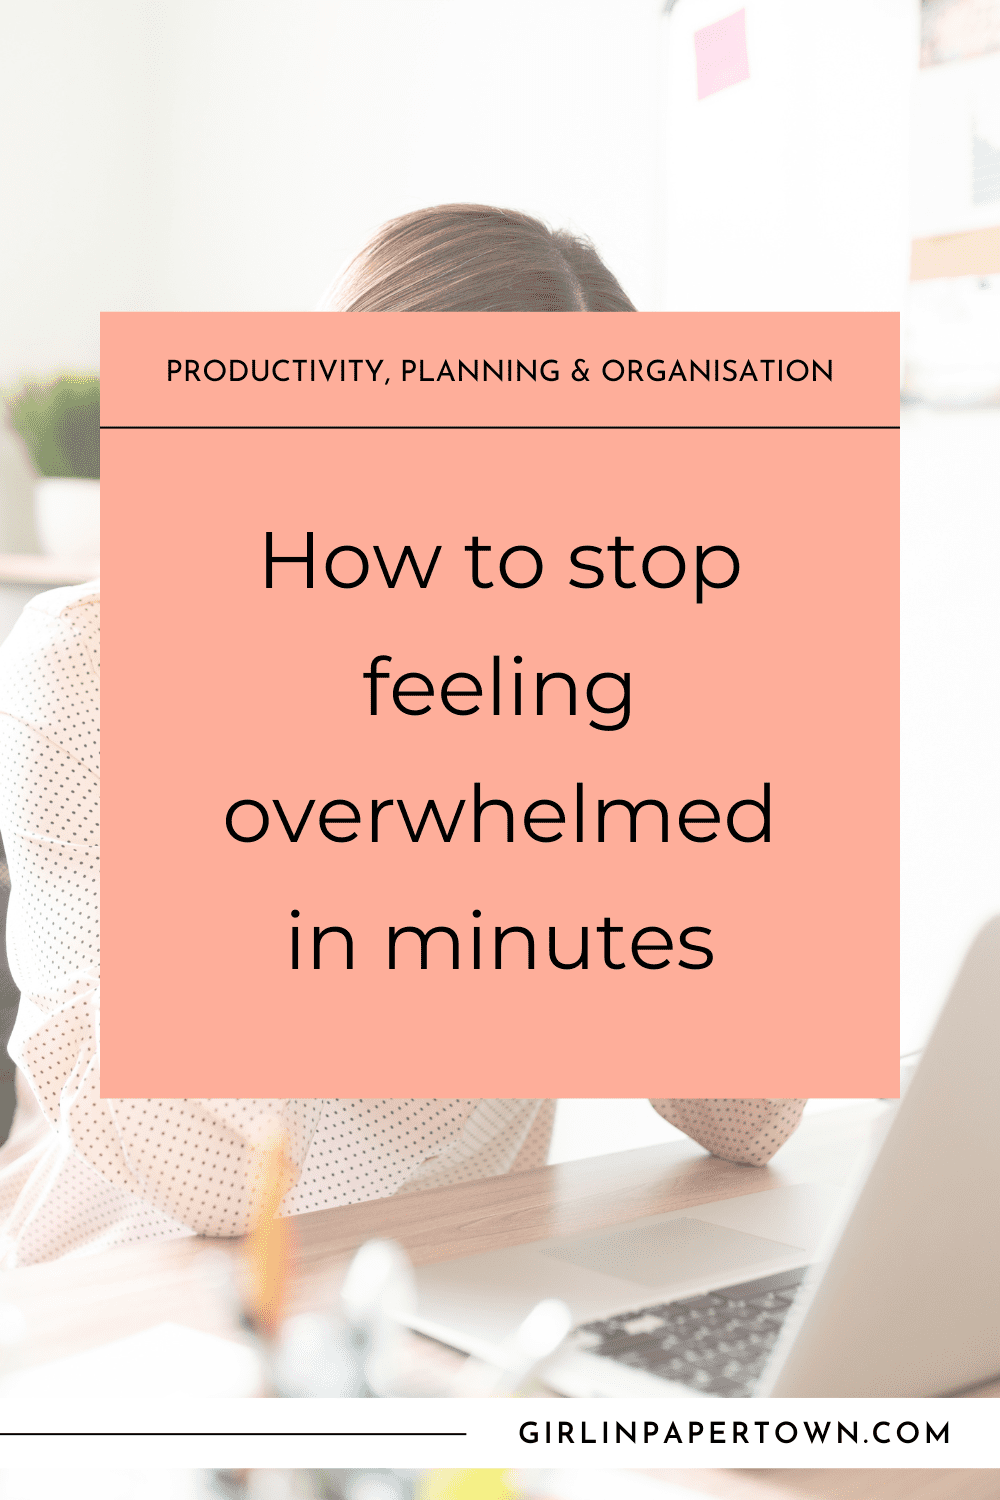 Productivity, planning, and organisation - how to stop feeling overwhelmed in minutes - open loops